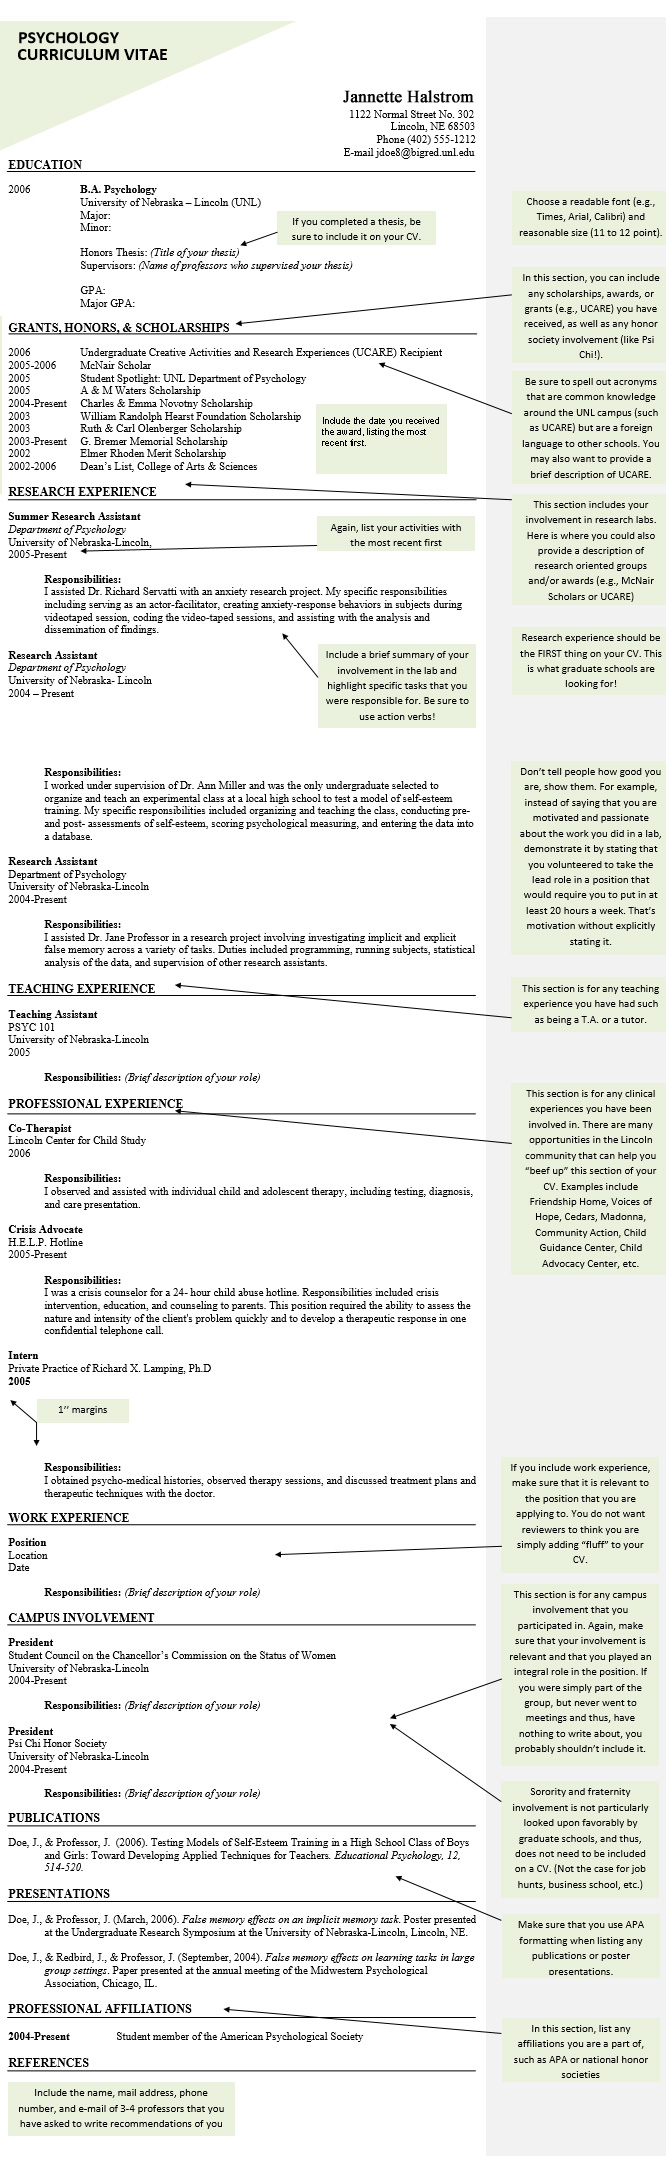 Psychology Cv And Resume Samples Templates And Tips